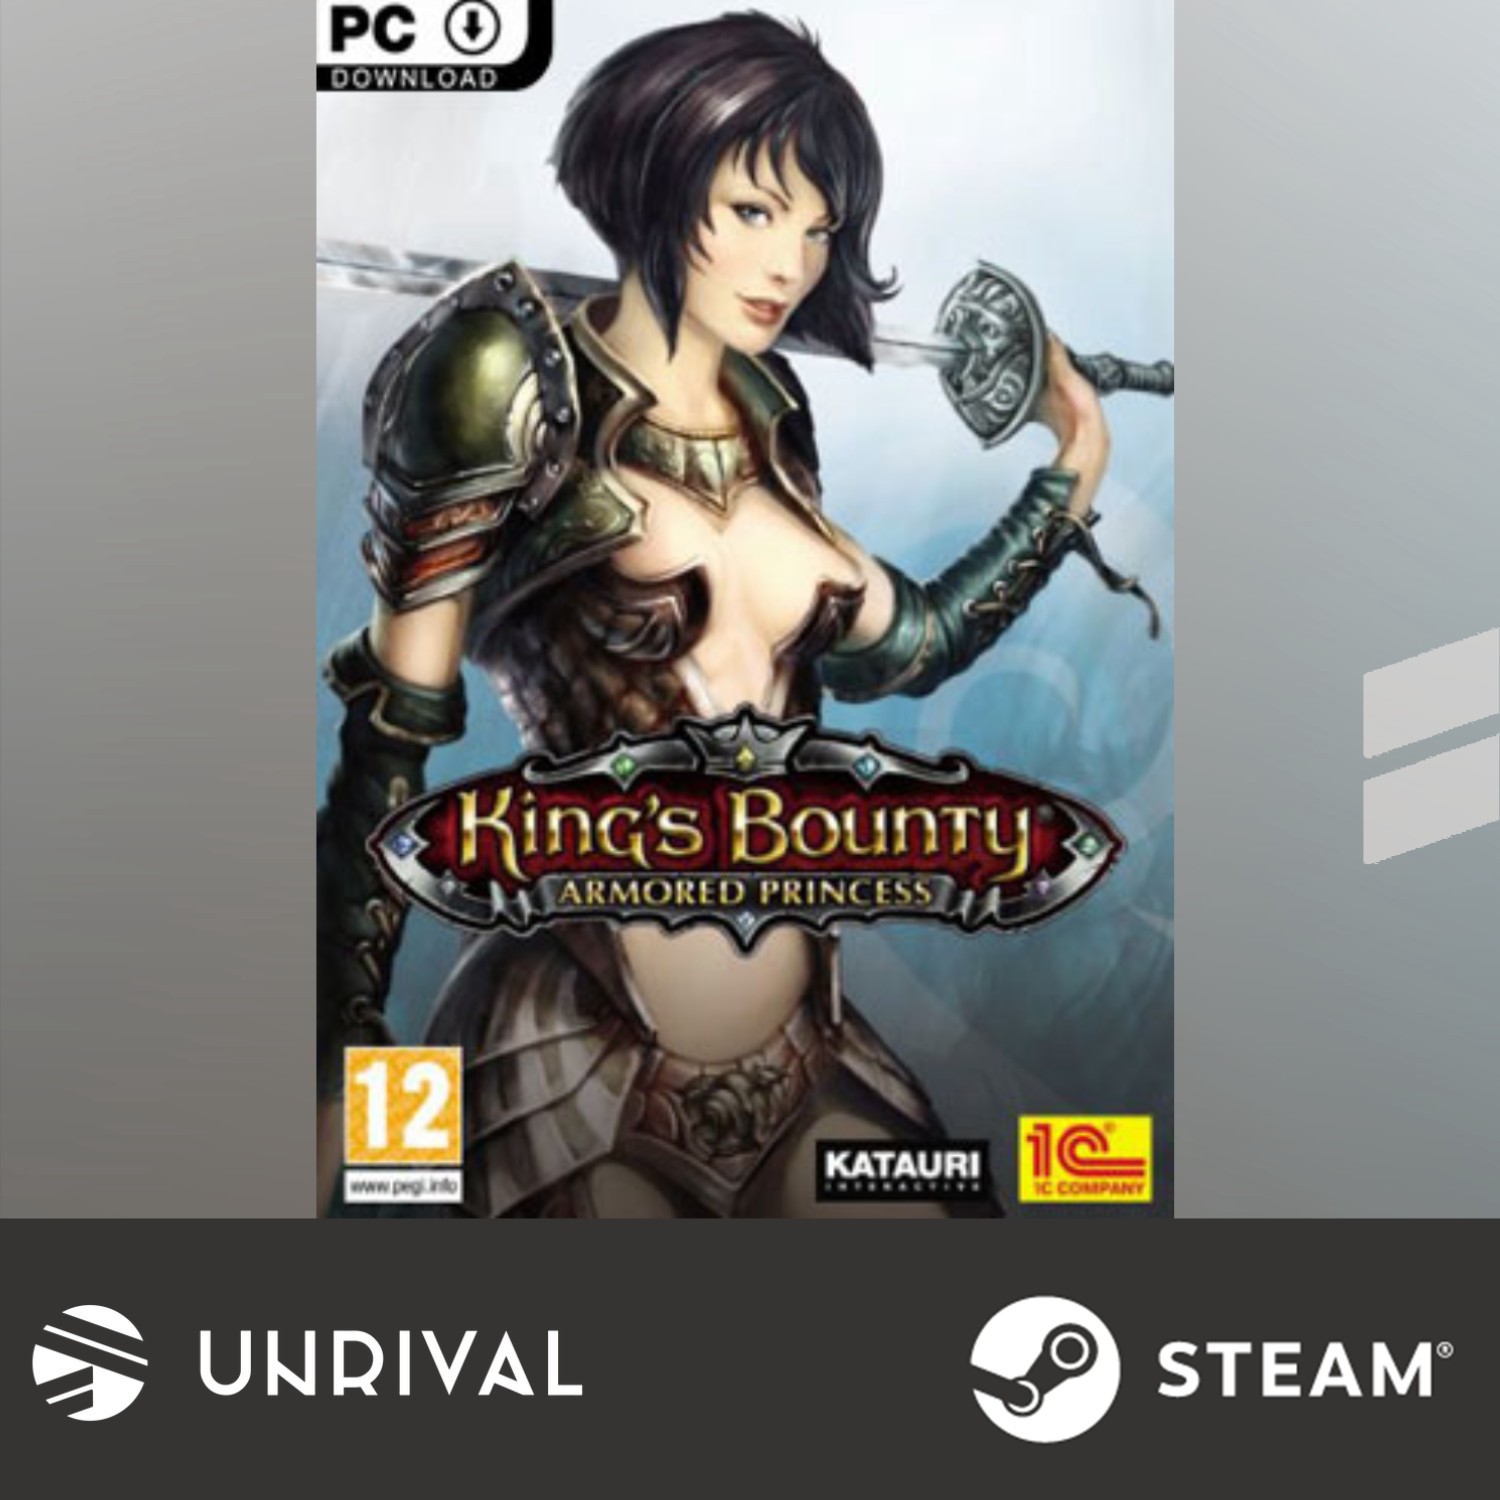 King's Bounty: Armored Princess PC Digital Download Game (Single Player) - Unrival